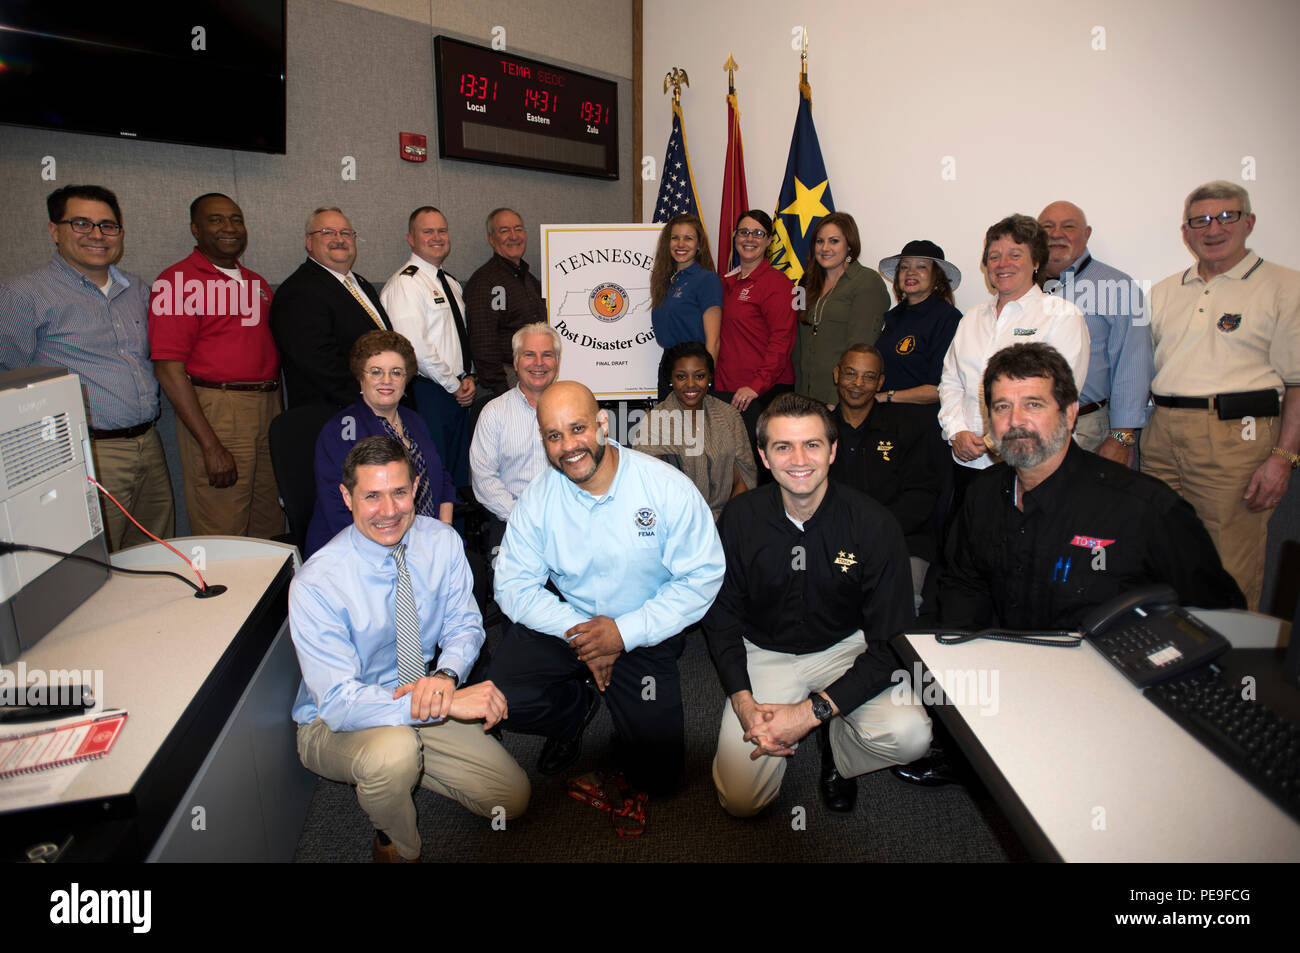 Silver Jackets partners pose together Nov. 17, 2015, during a ceremony at the Tennessee Emergency Management Agency to announce the distribution of the Tennessee Post Disaster Guide to emergency management personnel across the state.  Silver Jackets is an innovative program where multiple state, federal, and sometimes tribal and local agencies learn from each other and apply knowledge to reduce risk to natural hazards.  Program goals include improved communication, facilitation of actions to reduce vulnerability and consequences of flooding, creation or supplement of mechanisms to implement or Stock Photo